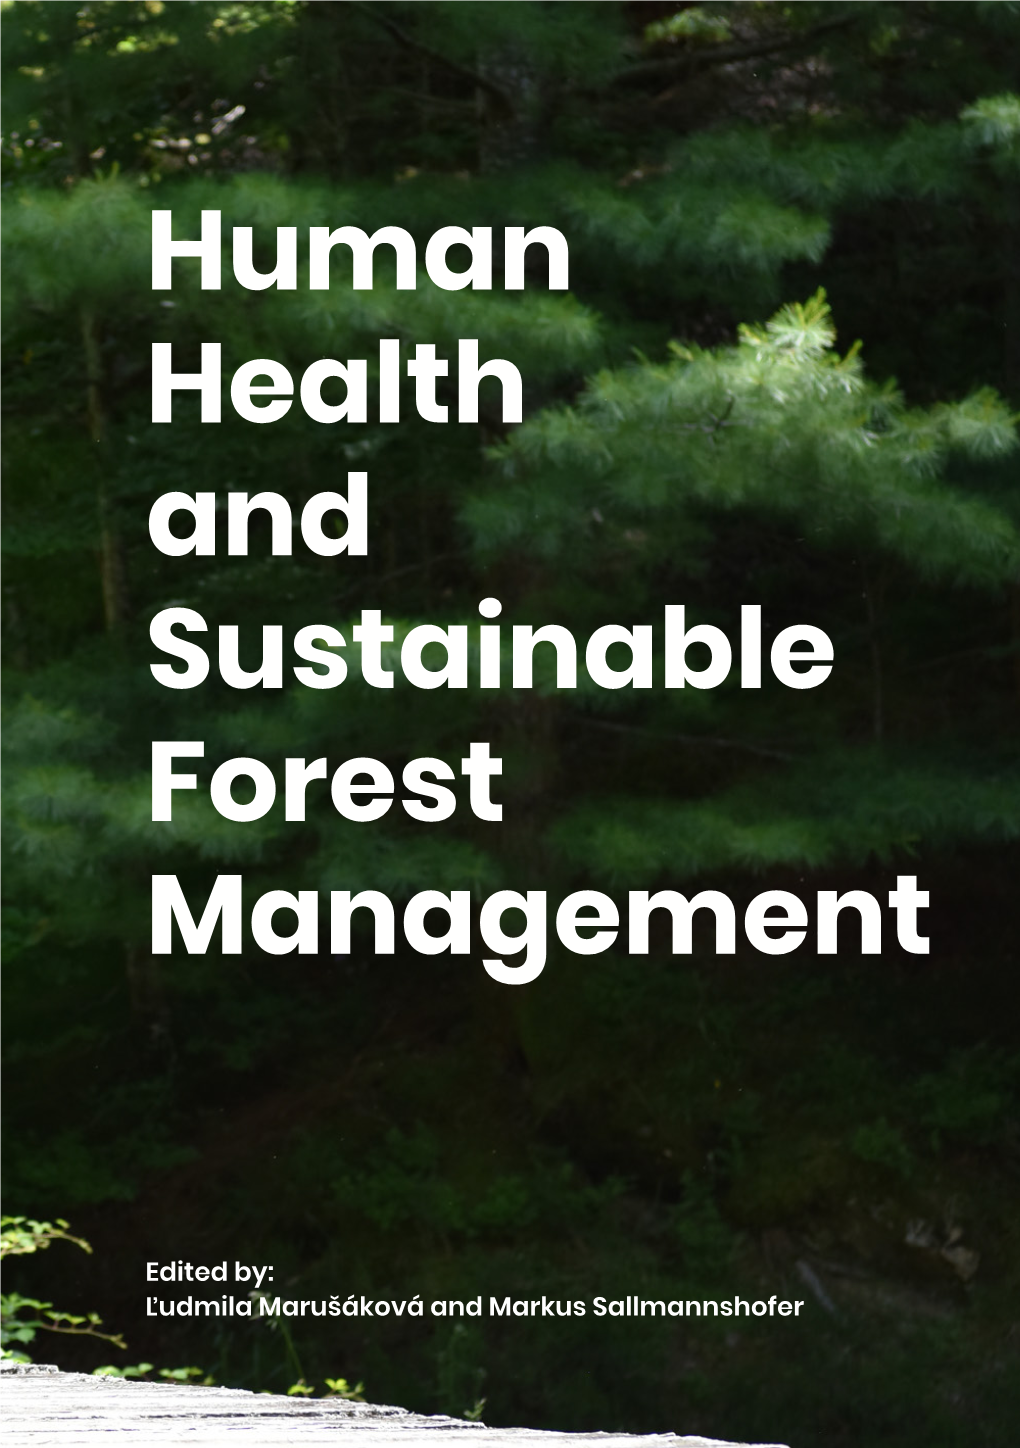 Human Health and Sustainable Forest Management